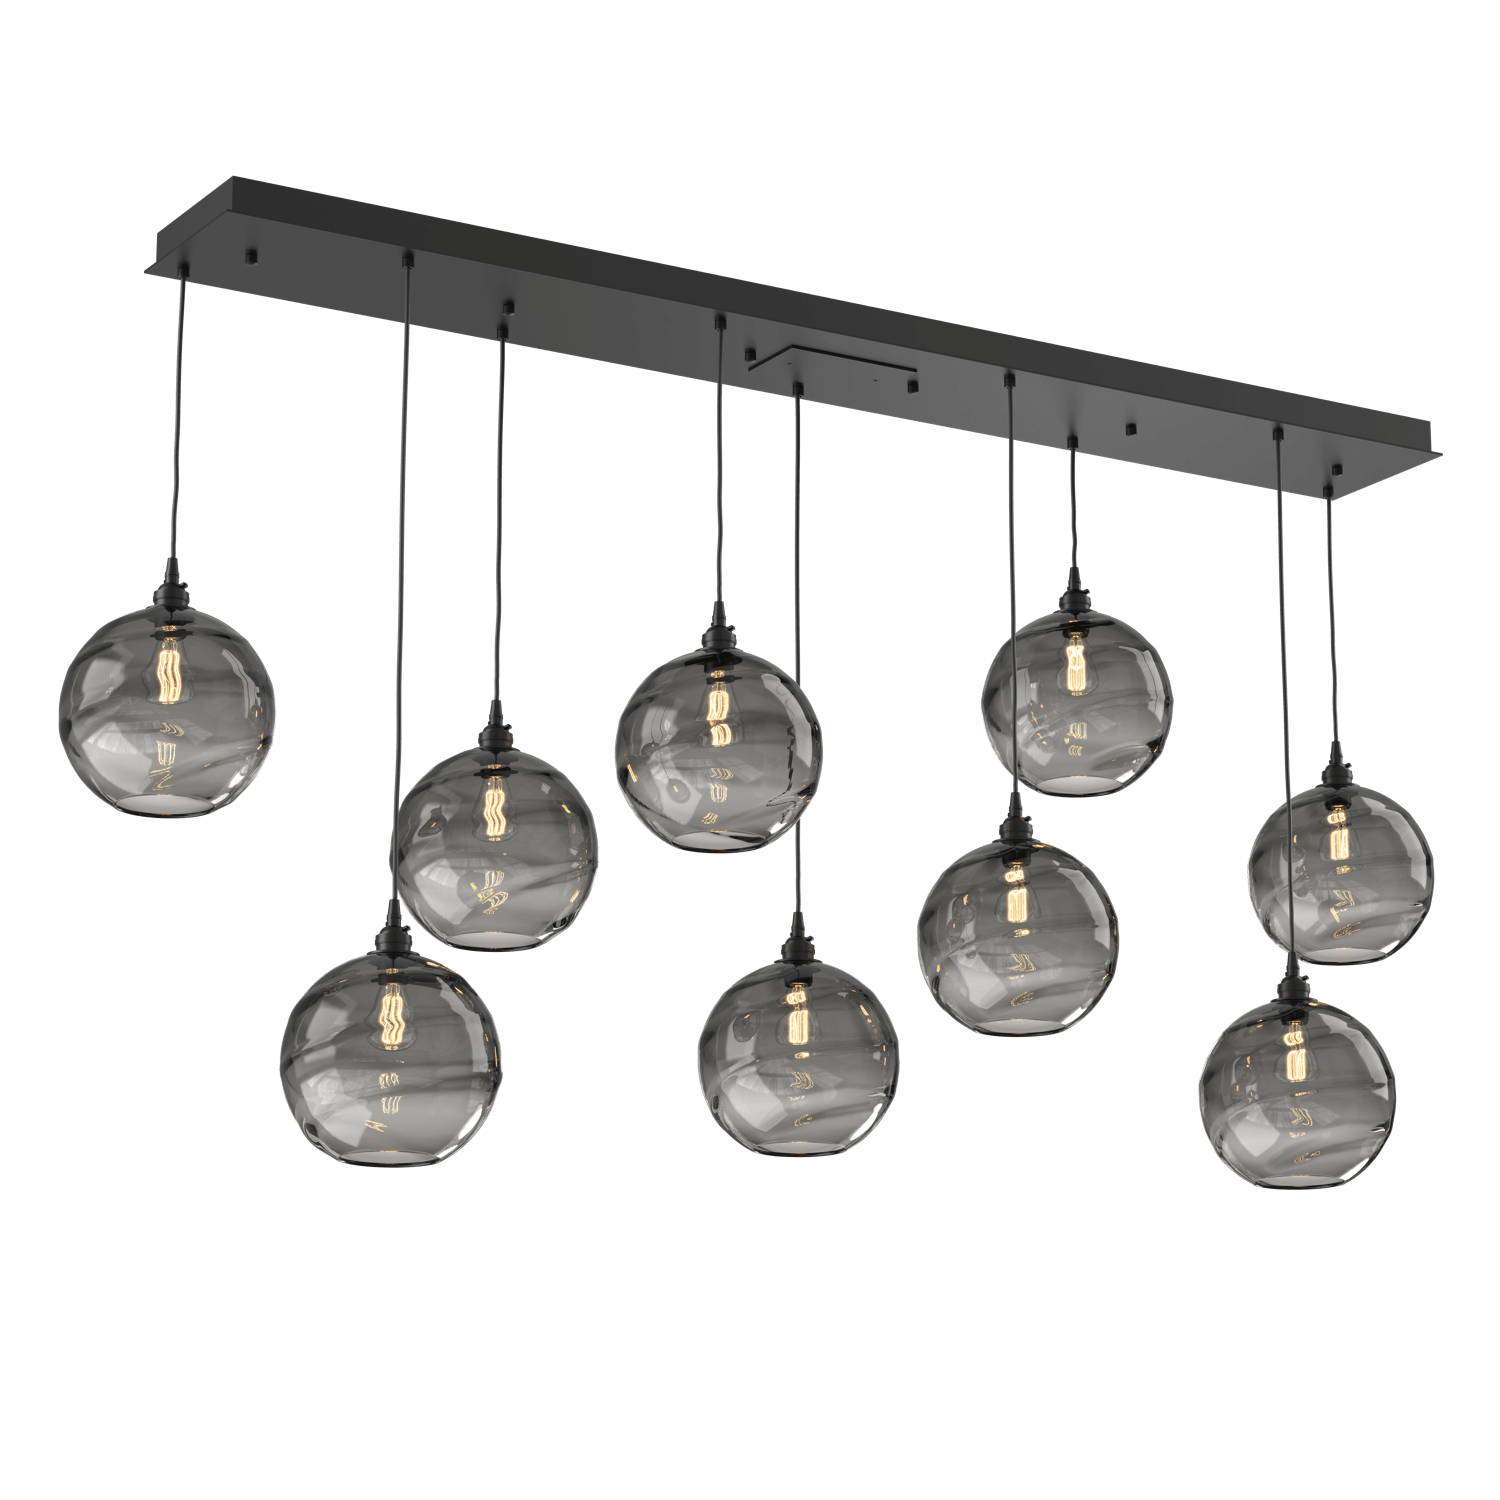 PLB0047-09-MB-OS-Hammerton-Studio-Optic-Blown-Glass-Terra-9-light-linear-pendant-chandelier-with-matte-black-finish-and-optic-smoke-blown-glass-shades-and-incandescent-lamping